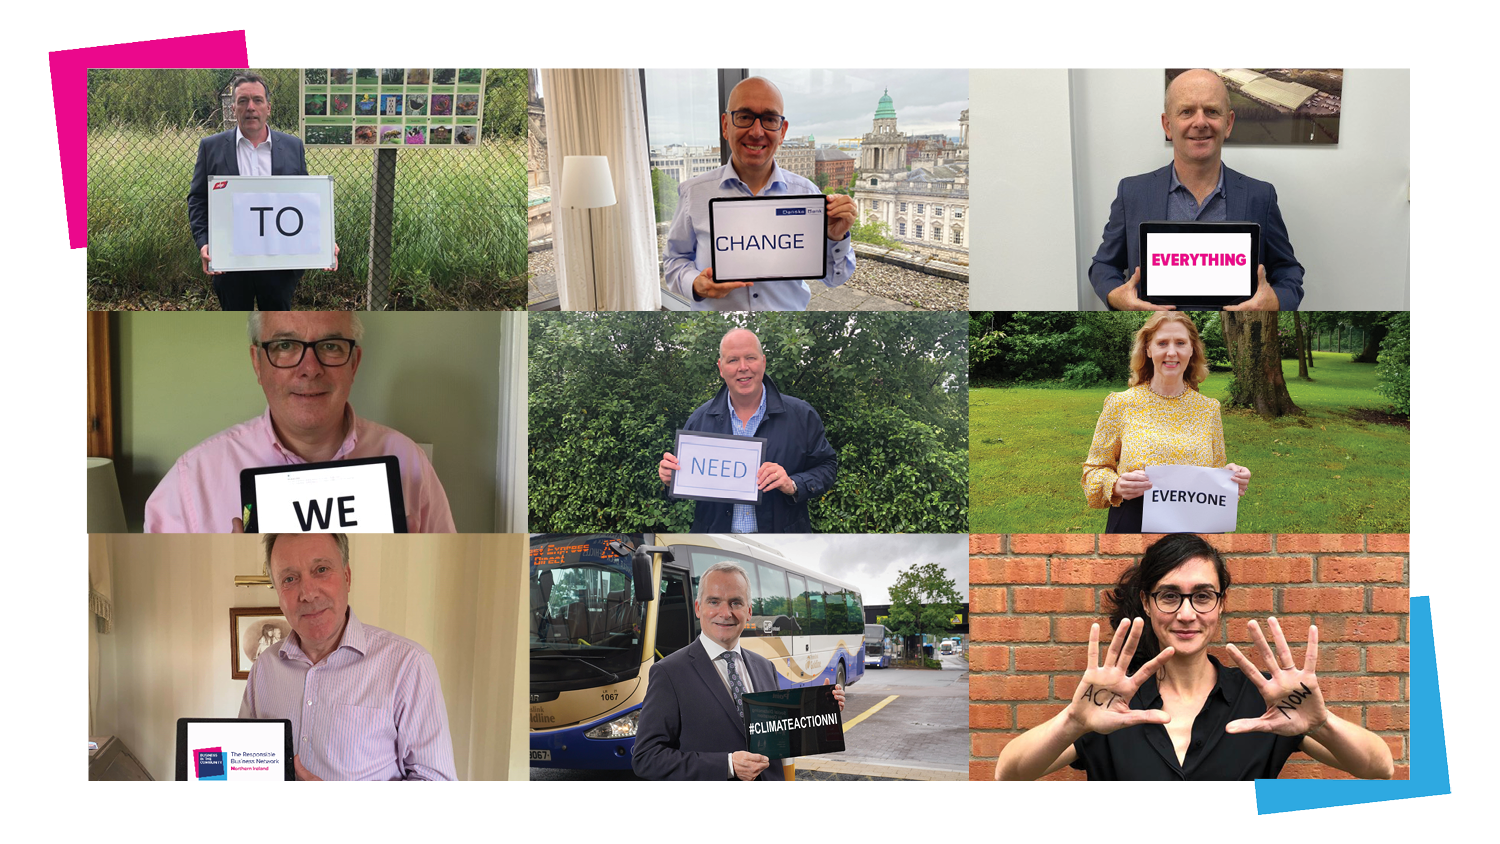 Six photos make up a collage. They are men and women all holding signs/tablets with words spelling out 'To change everything we need everyone'.